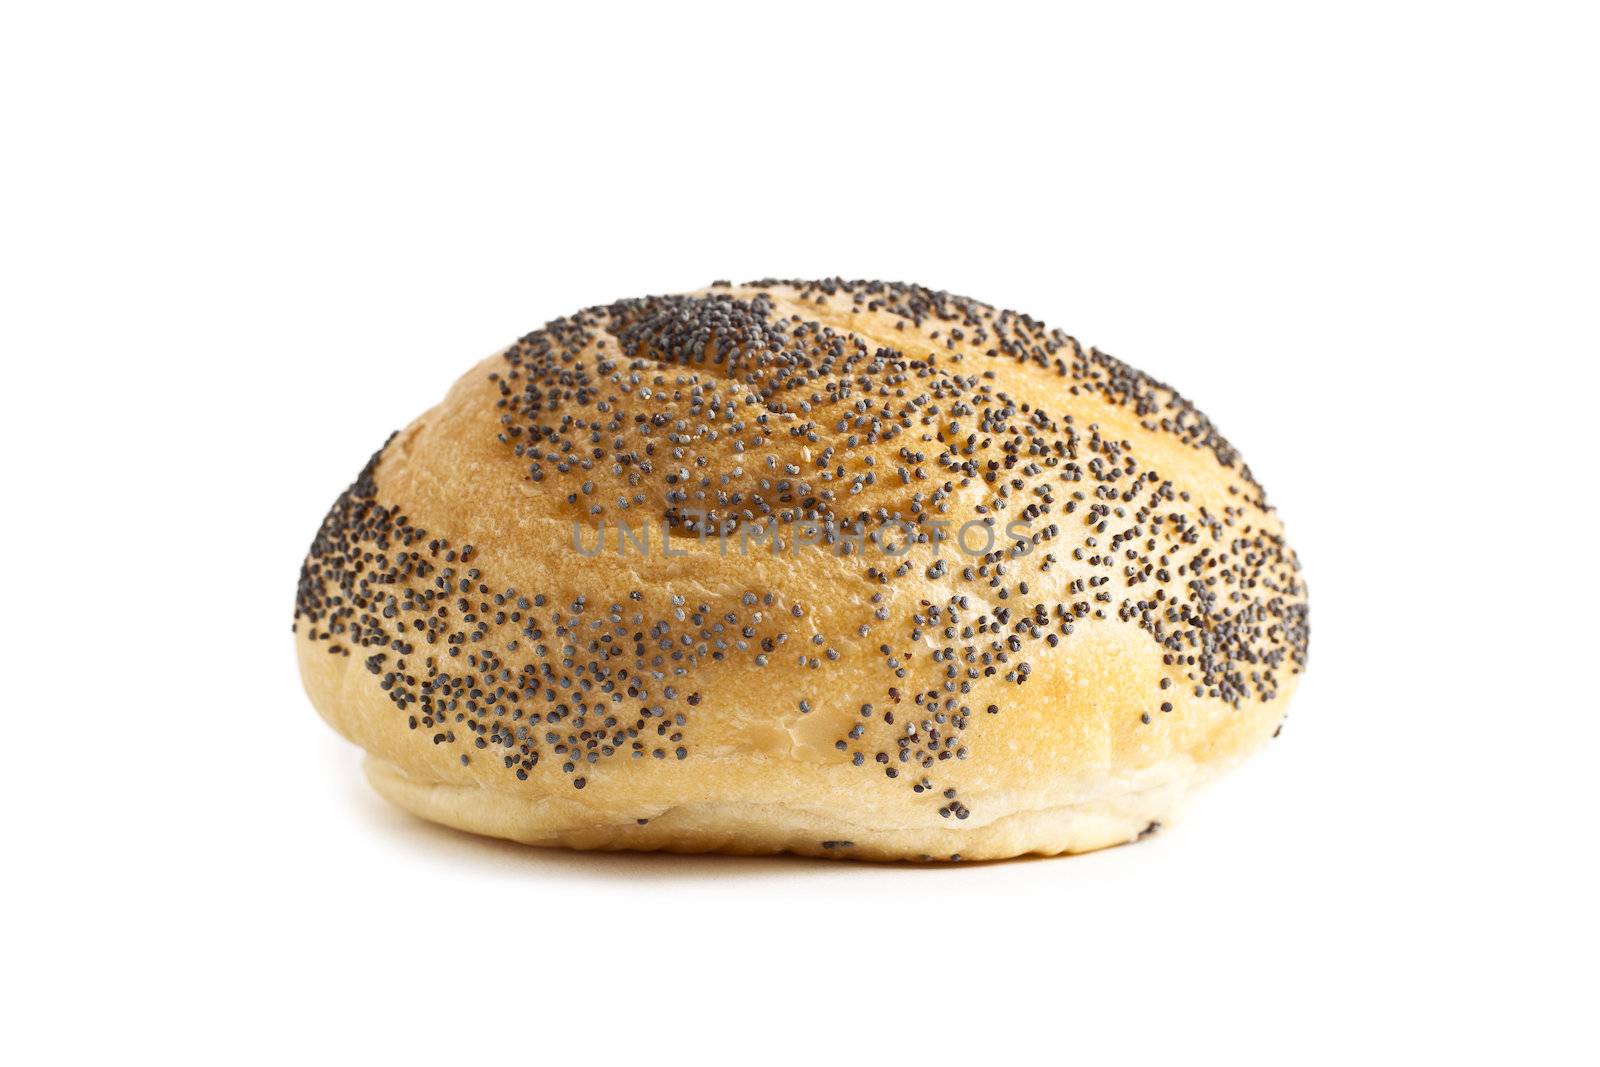 Fresh Bun with black sesame seeds isolated in a white background